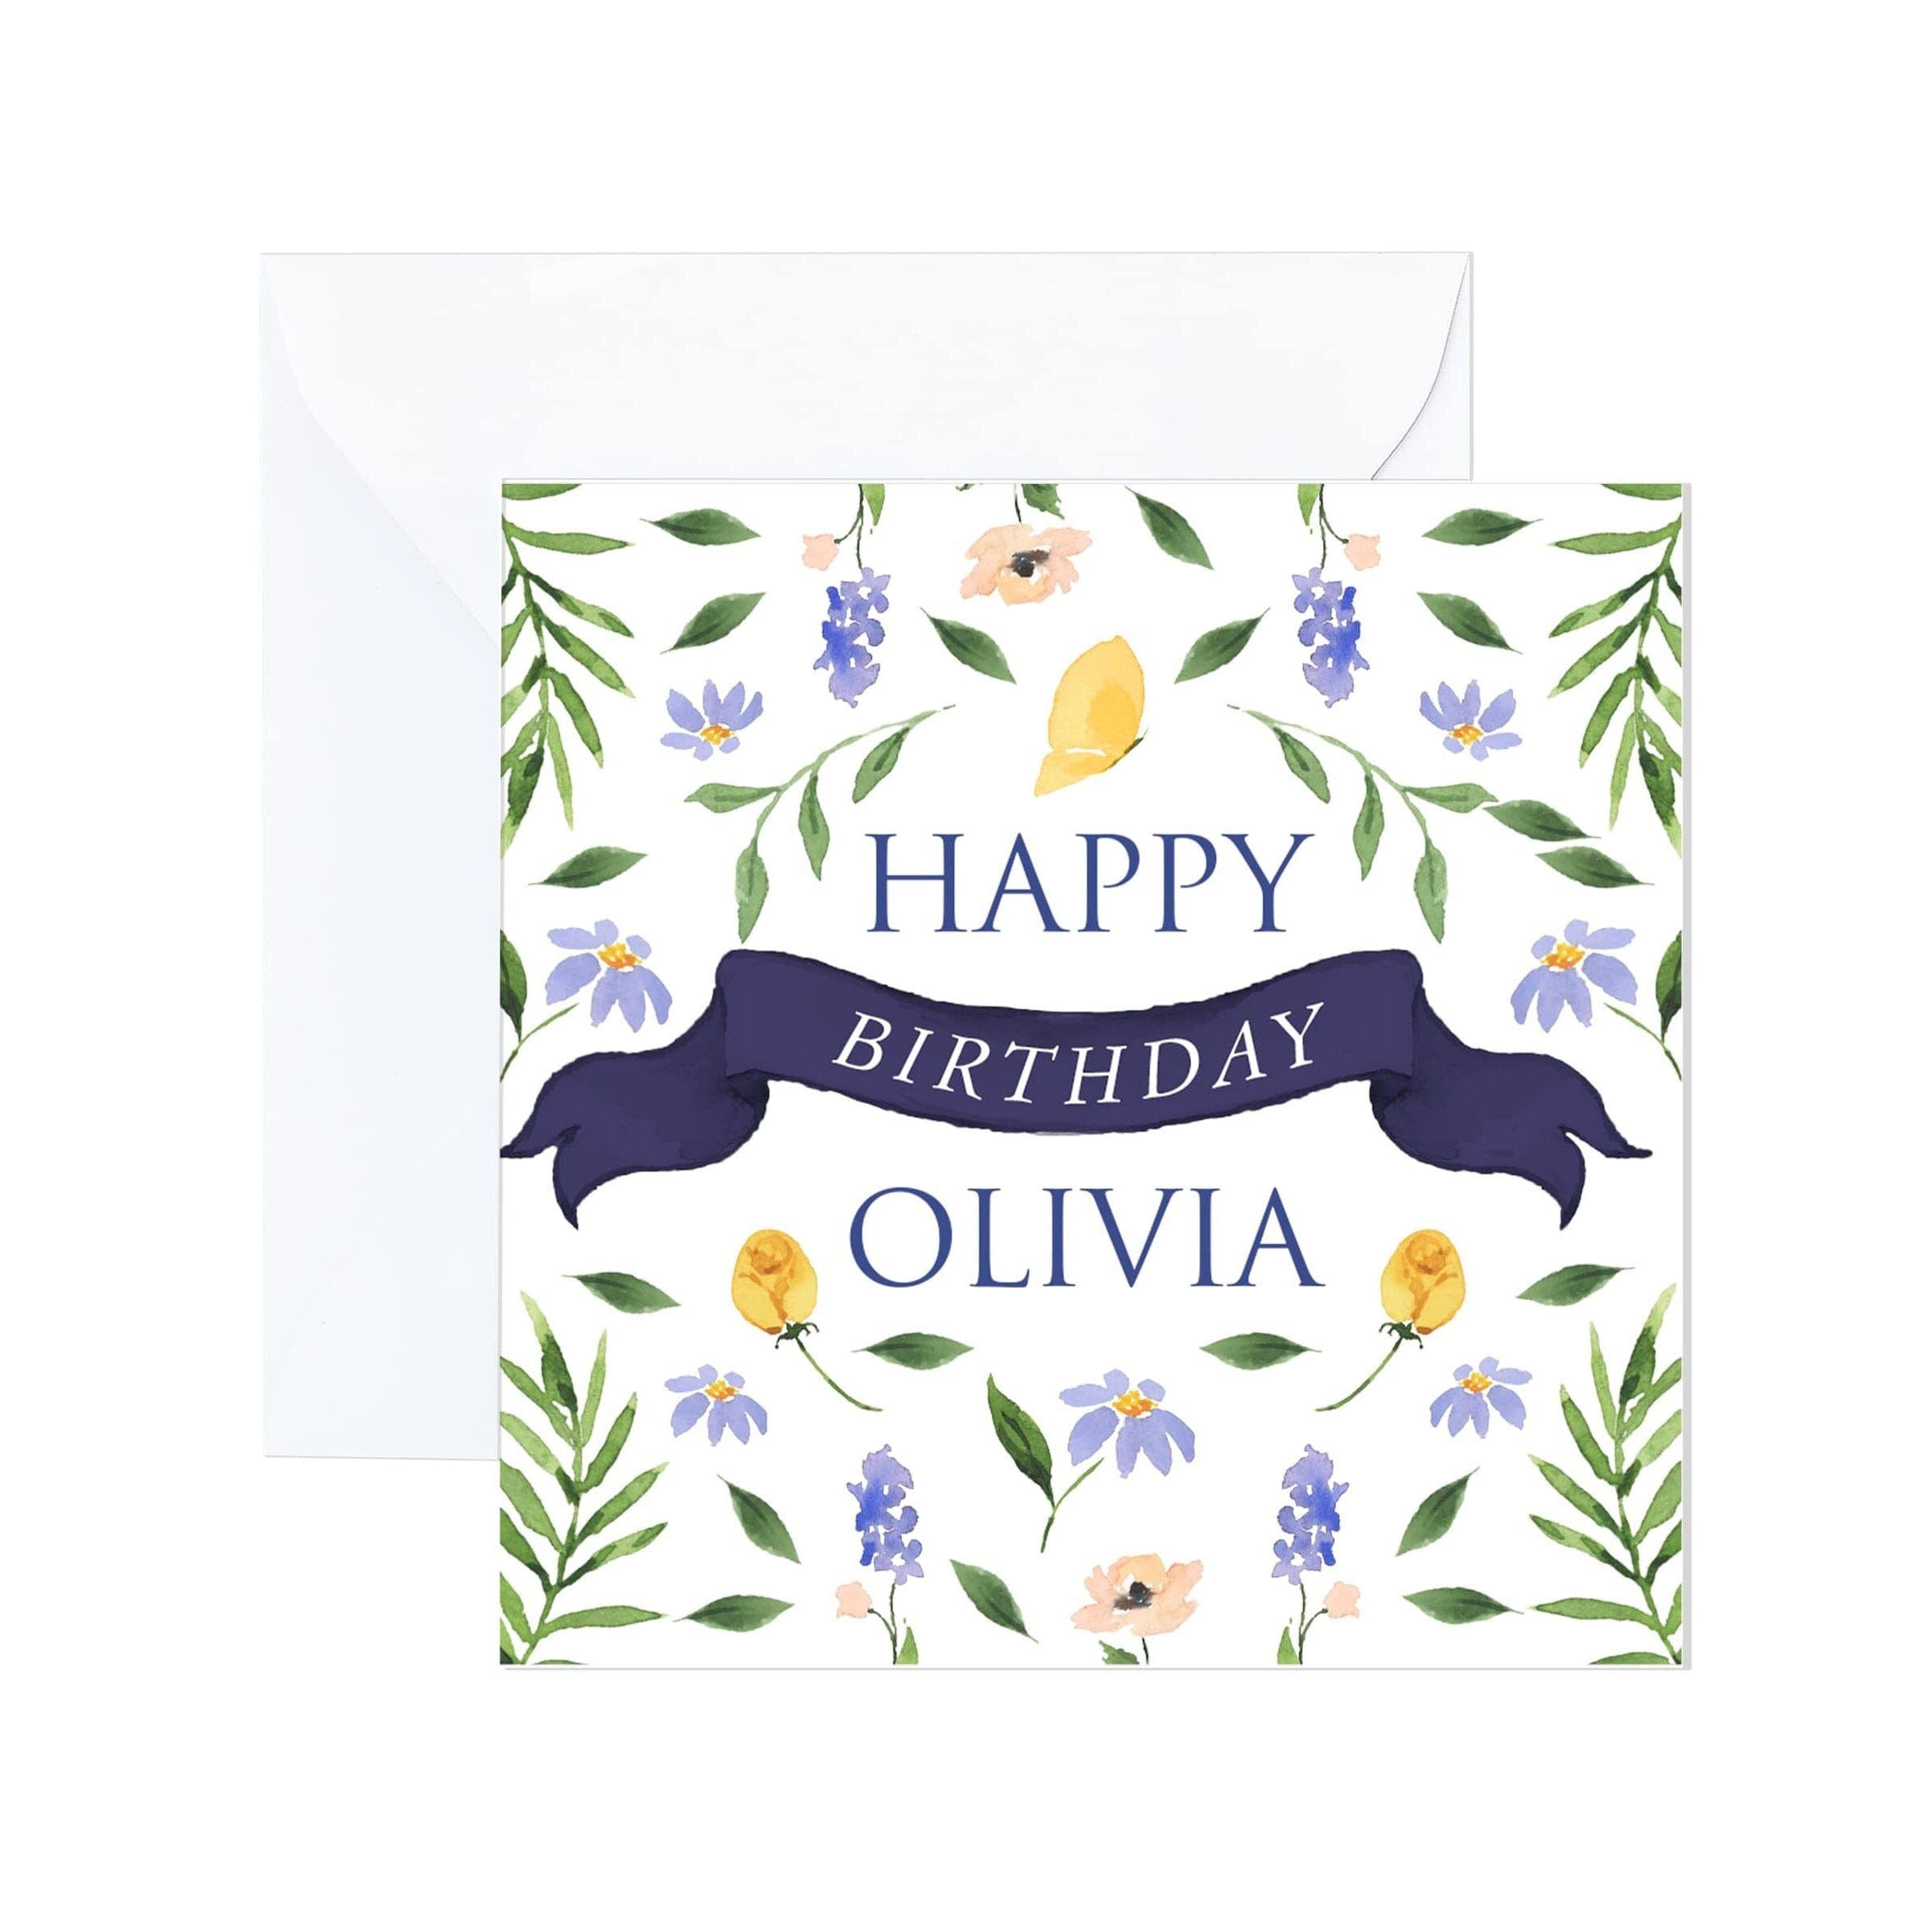 Personalised Birthday Card with name, with Envelope, Floral design with ribbon, Greetings Card for her him